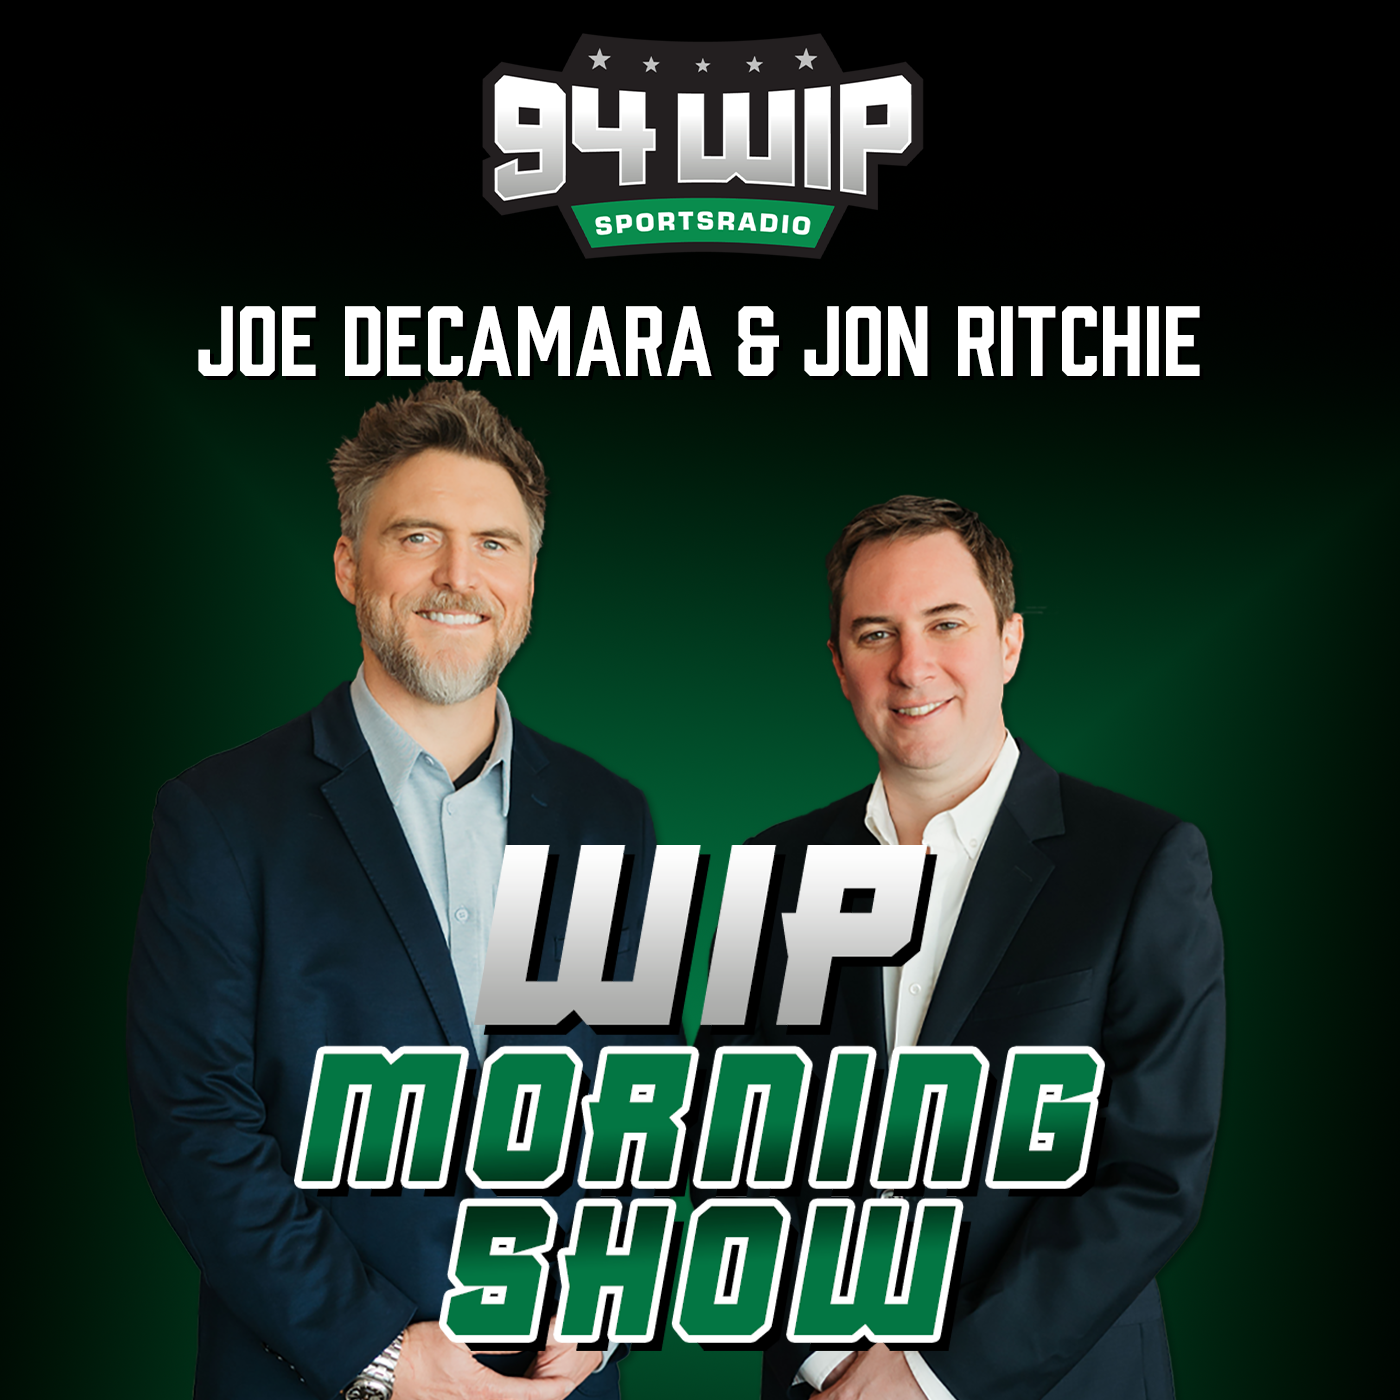 DeCamara : 'The Eagles have become worse'